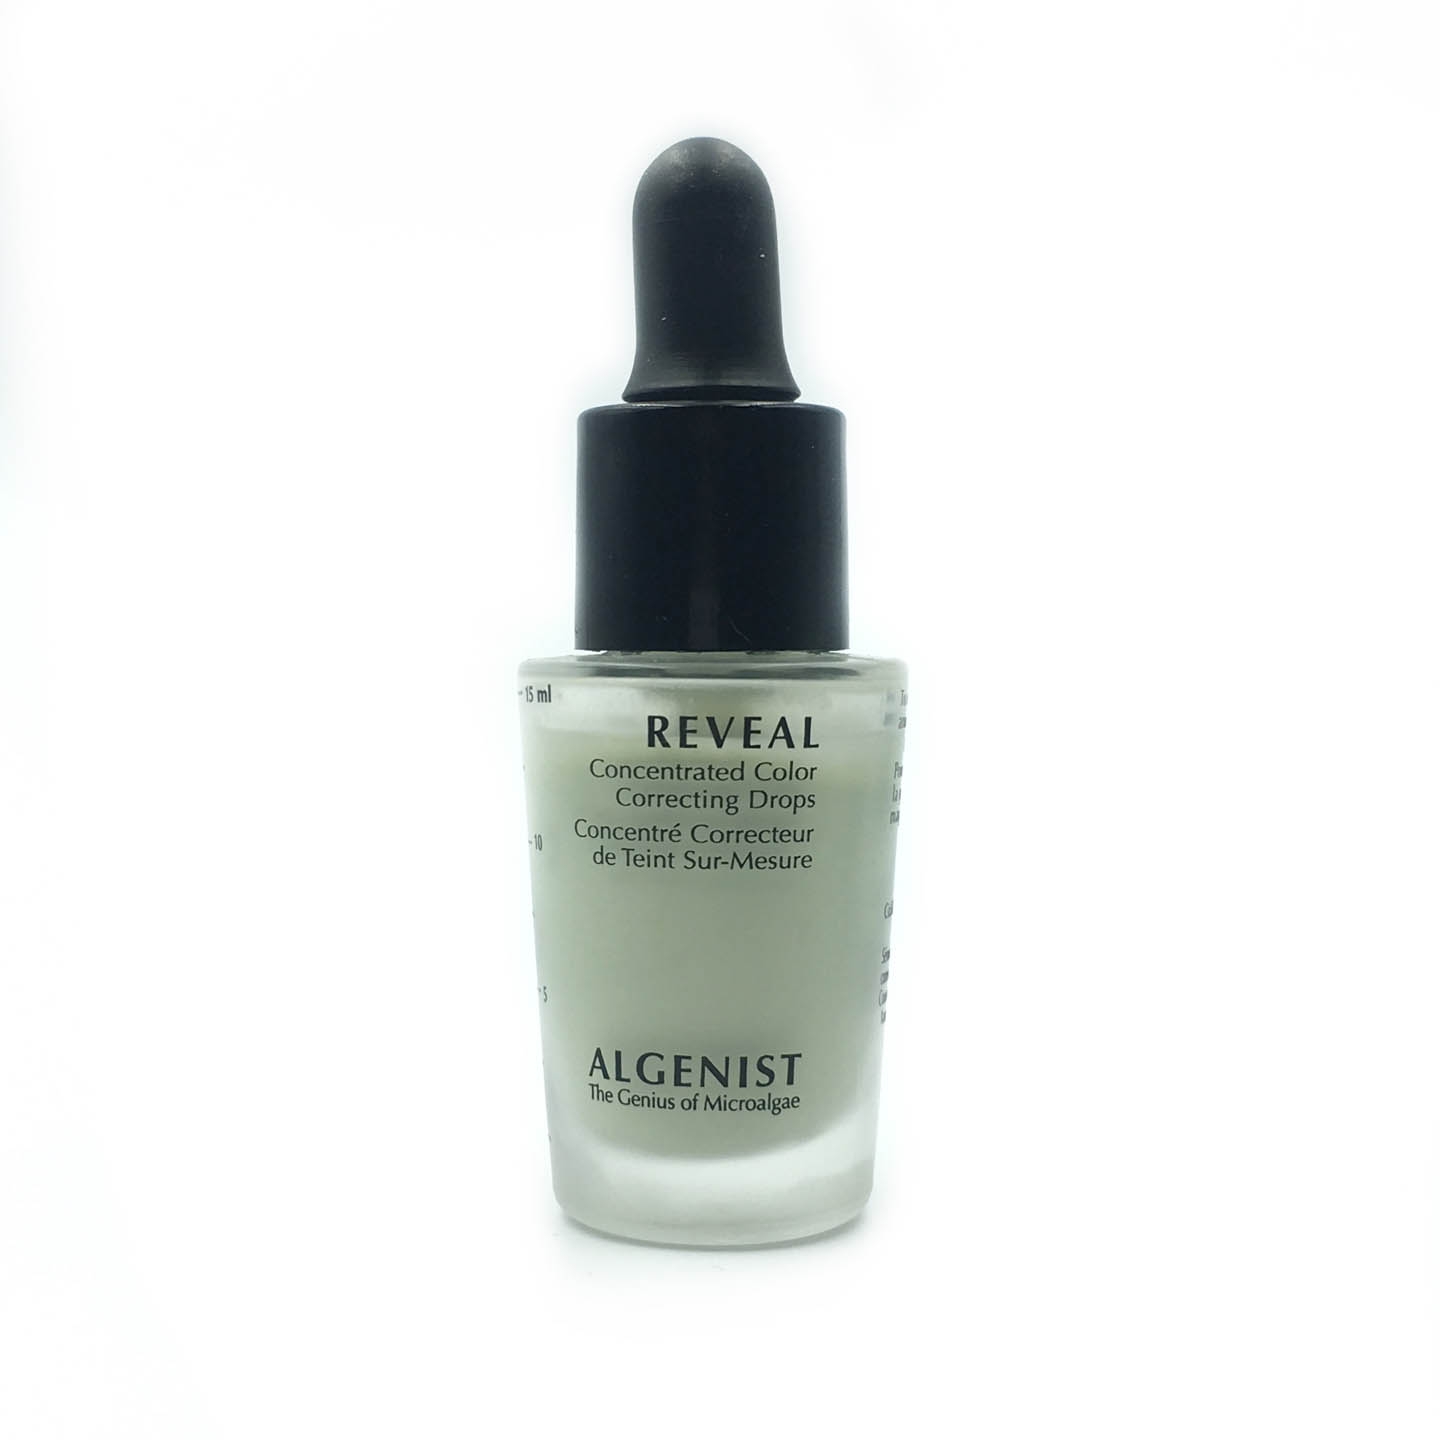 Algenist Green Color Corrects Redness Faces